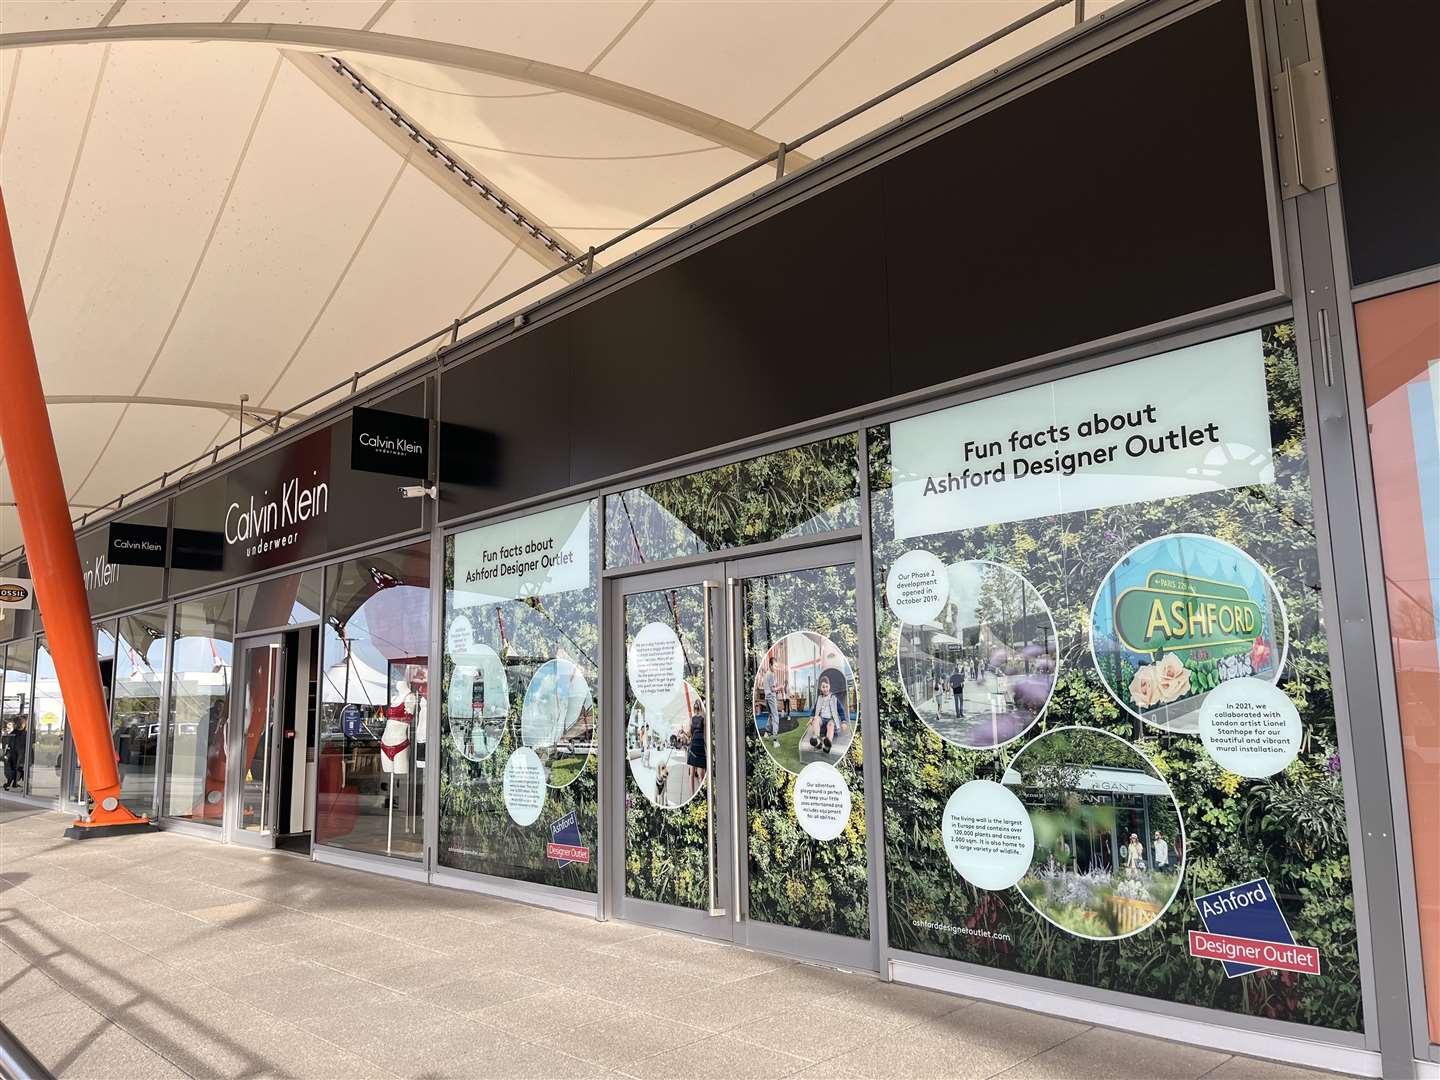 The pop-up donation point will be opening this weekend at Ashford Designer Outlet